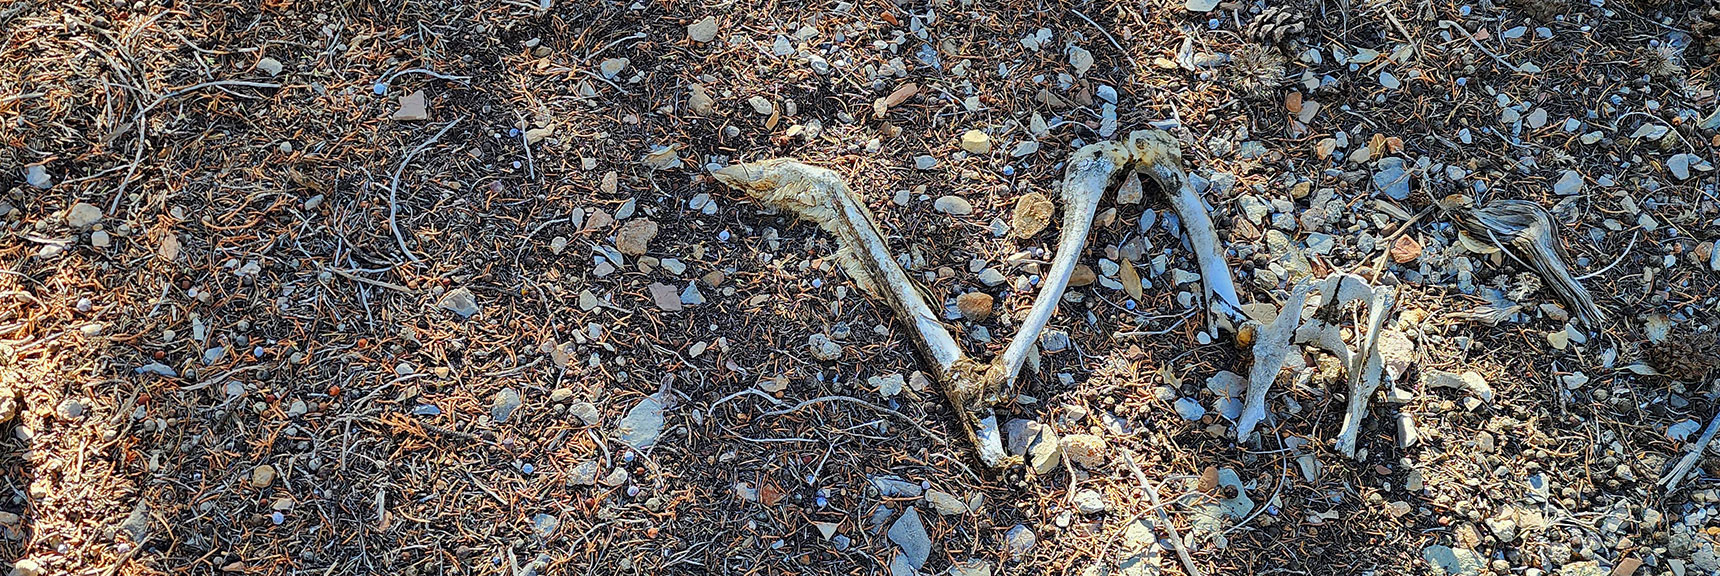 Hip and One Leg of Deer That Didn't Make It. | Switchback Spring Pinnacle | Wilson Ridge | Lovell Canyon, Nevada